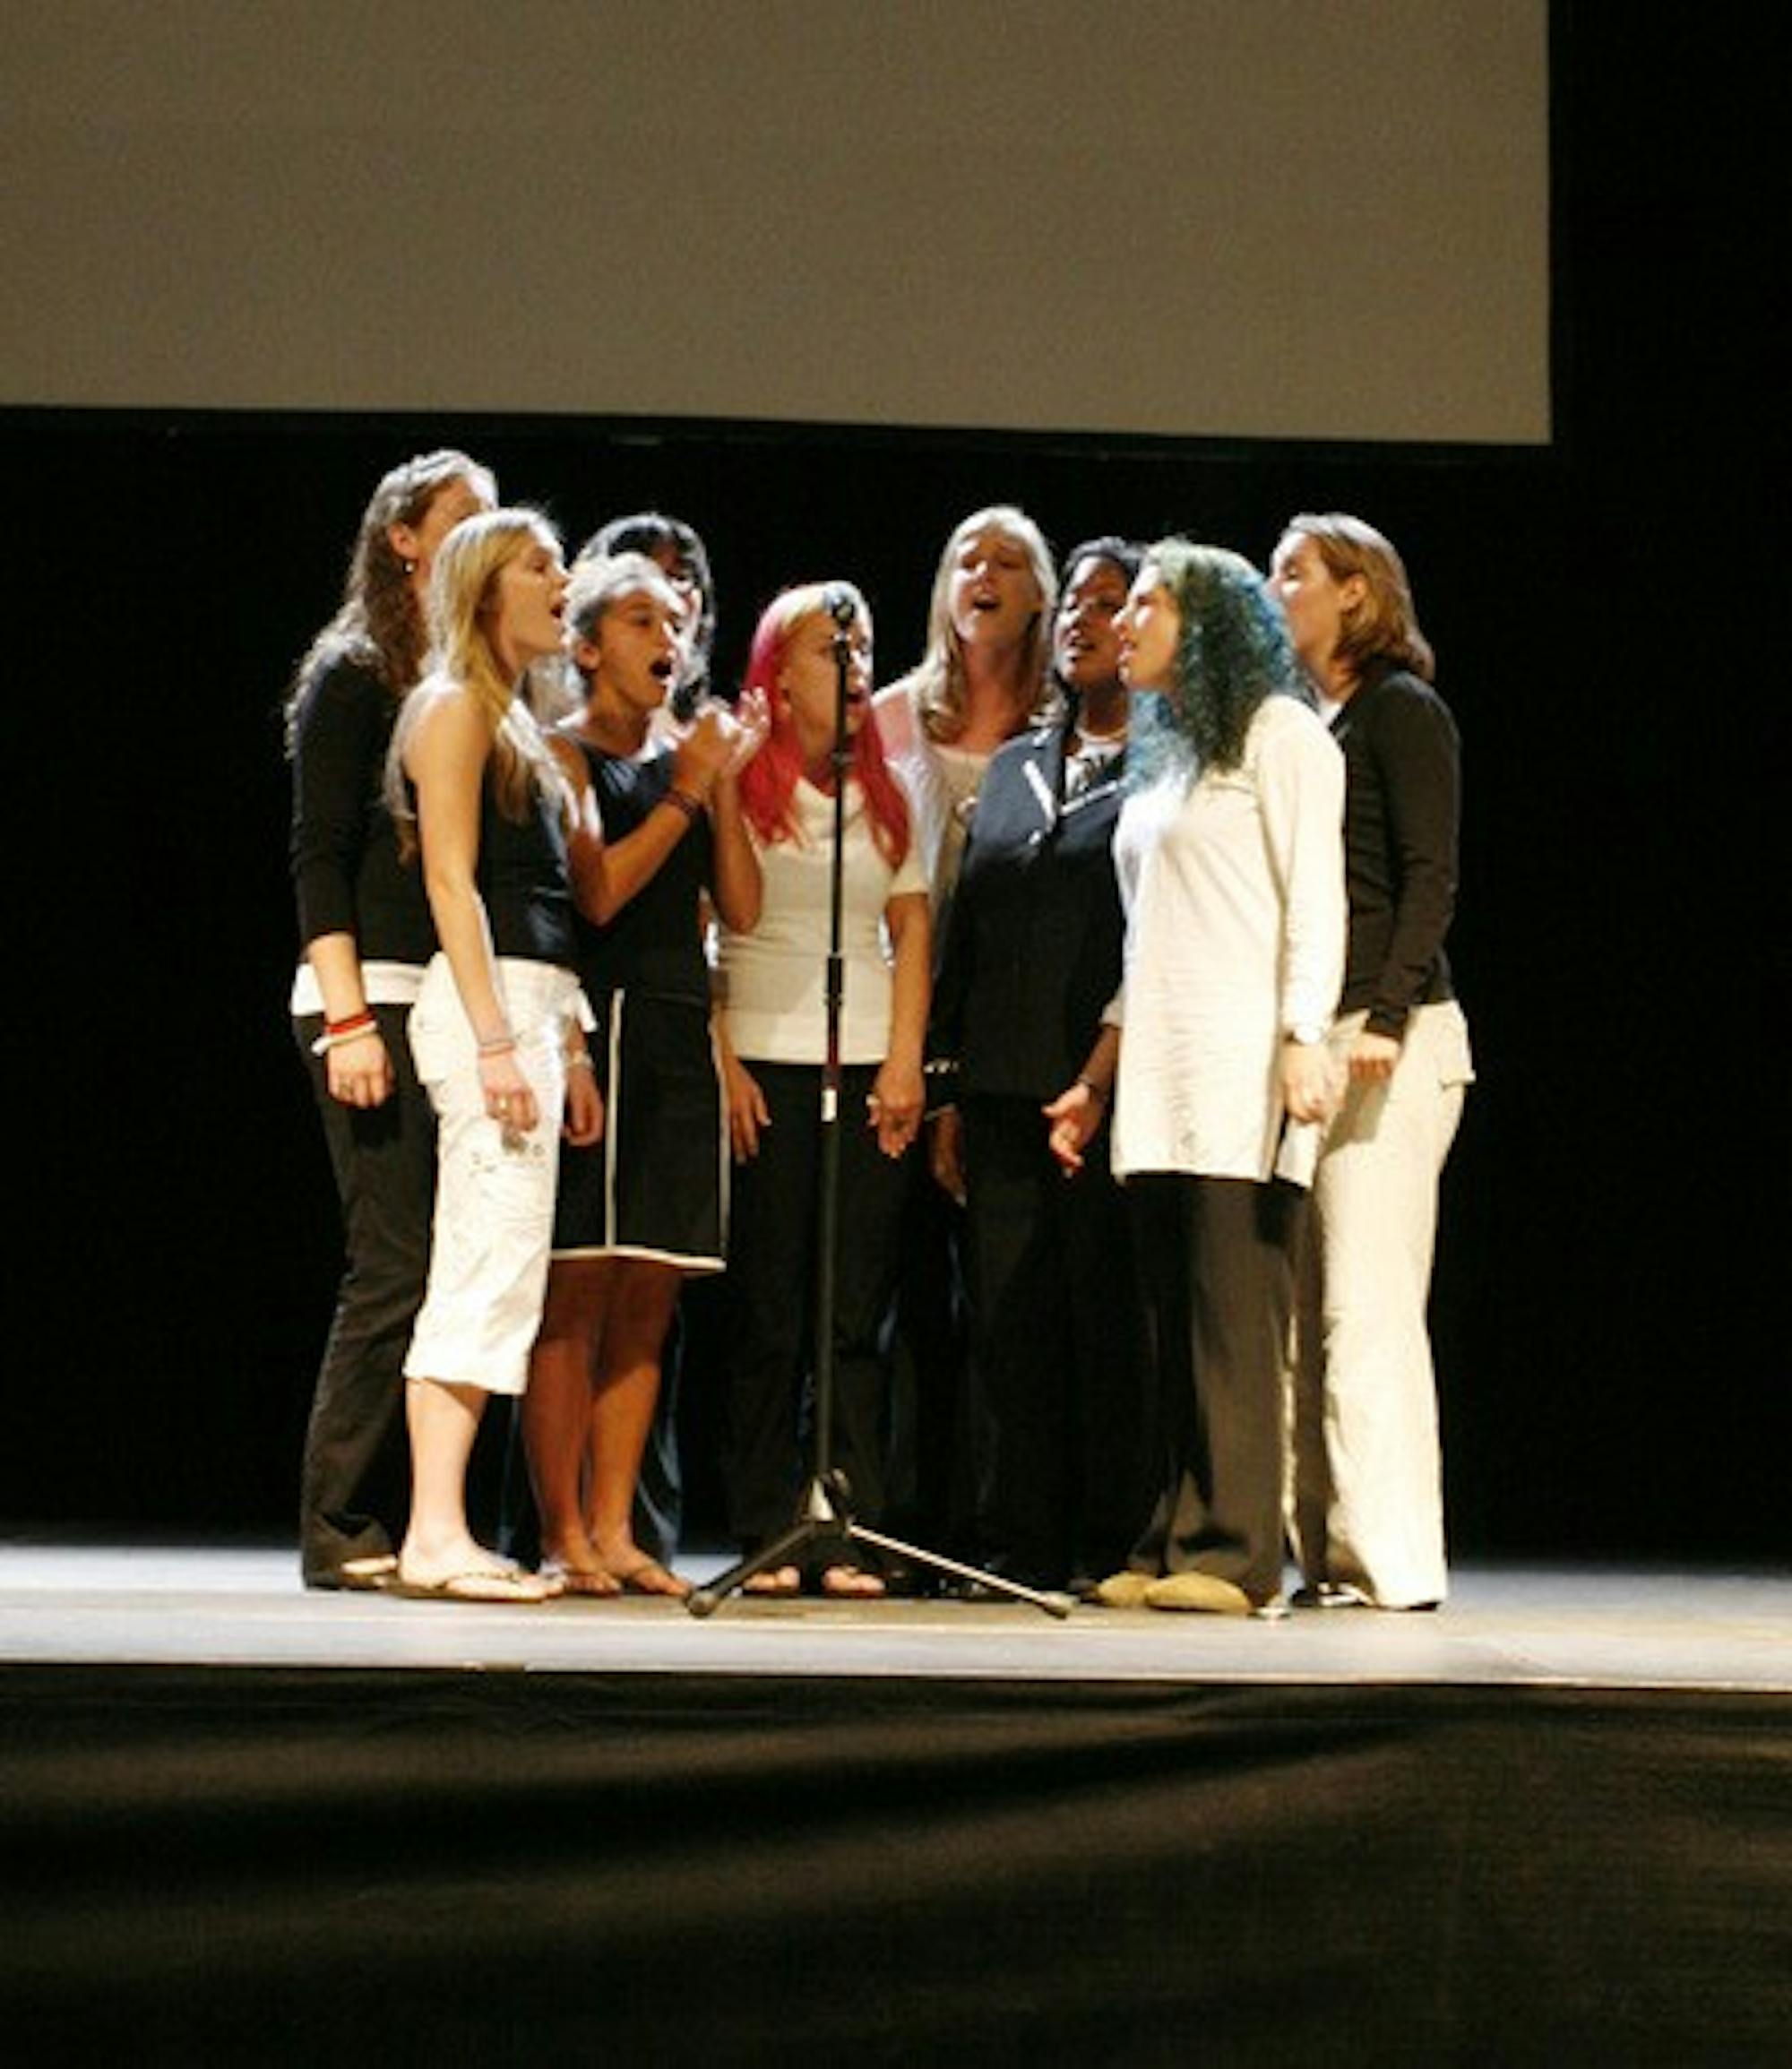 Dartmouth's women's a capella group for social justice, the Rockapellas, perform at an orientation event in Spaulding Auditorium.